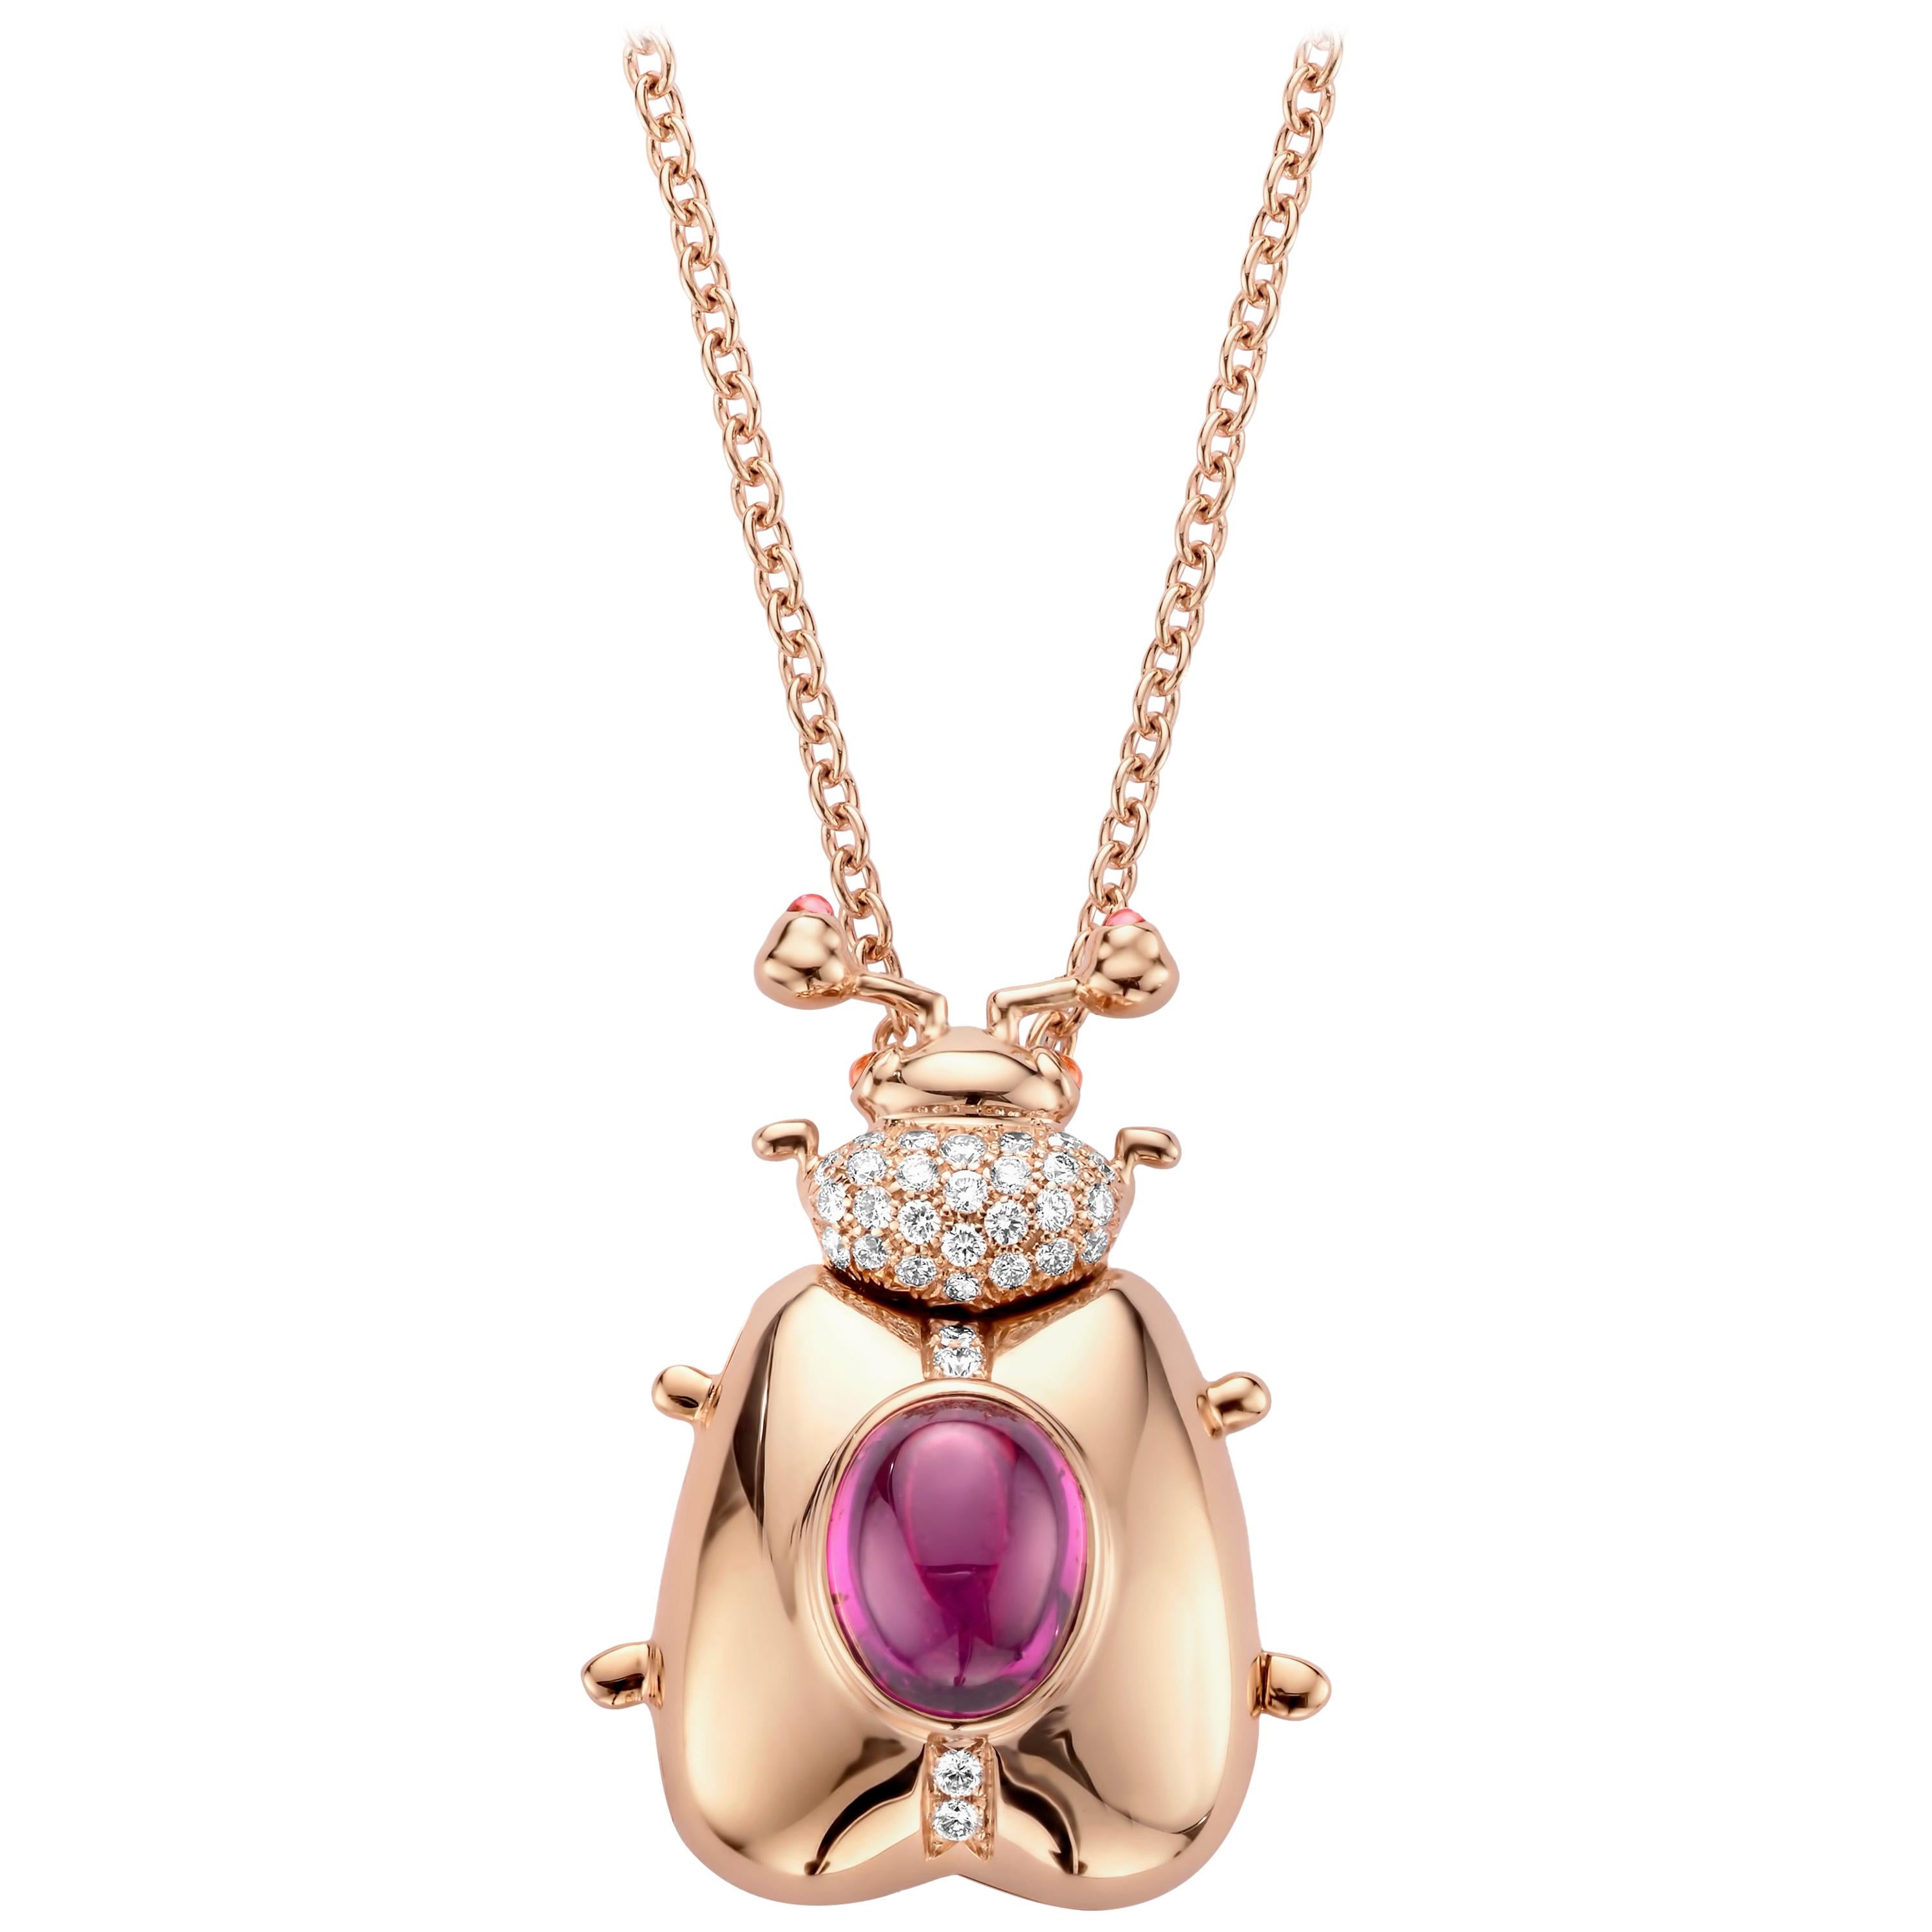 One of a kind lucky beetle necklace in 18 Karat rose gold 16g set with the finest diamonds in brilliant cut 0,31Ct (VVS/DEF quality) and one natural, royal purple garnet in oval cabochon cut 3,10Ct. 

The feelers and the eyes of this adorable